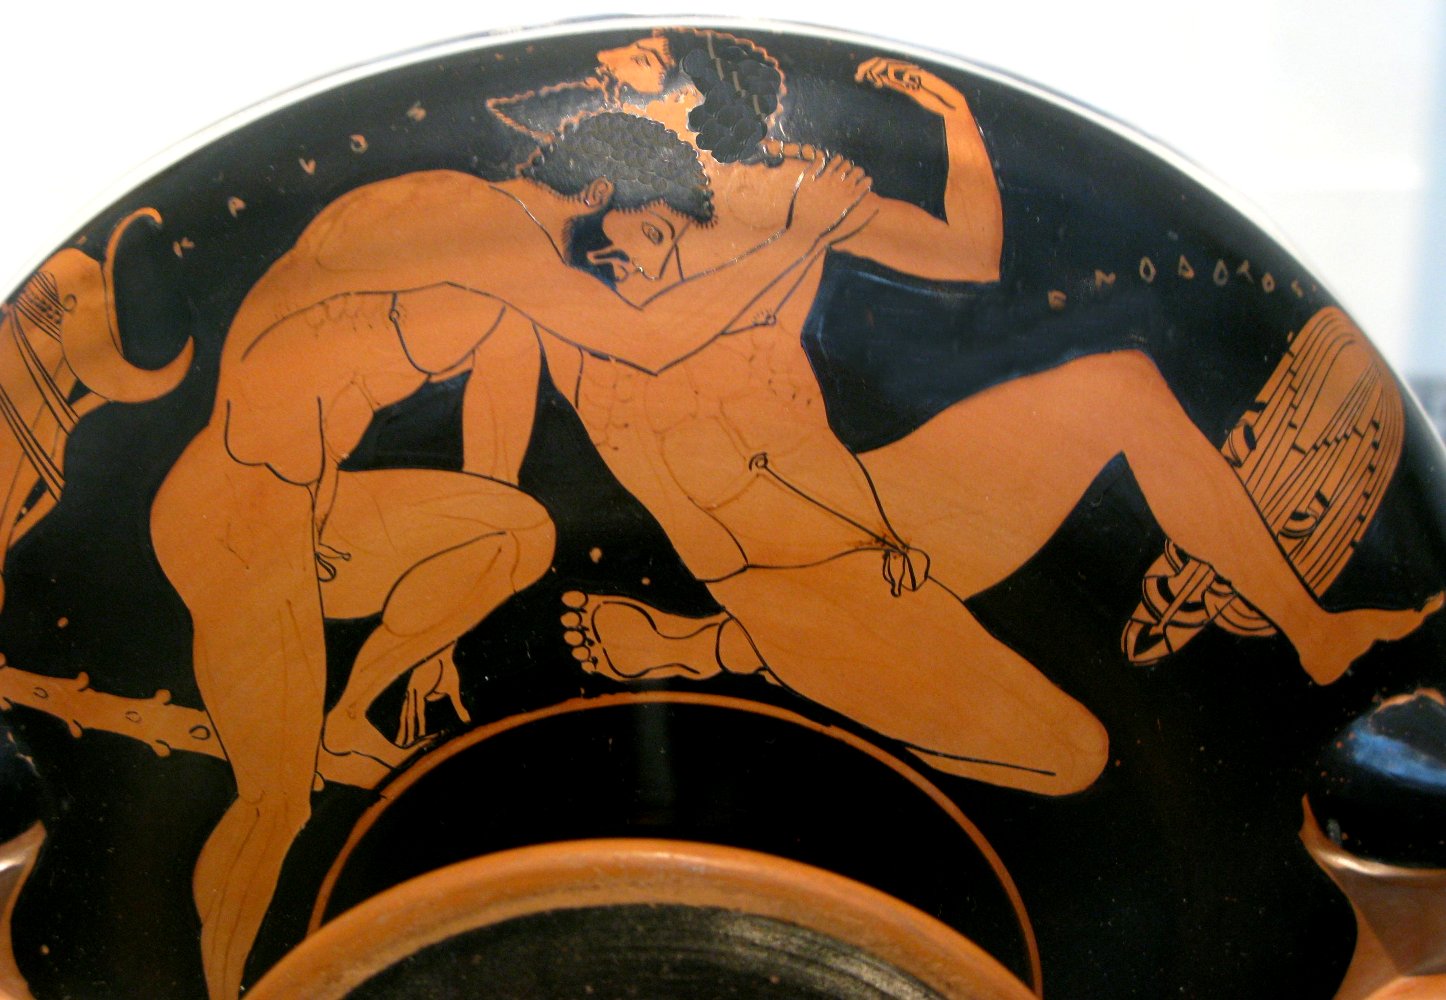 A violent world given in classical greek art